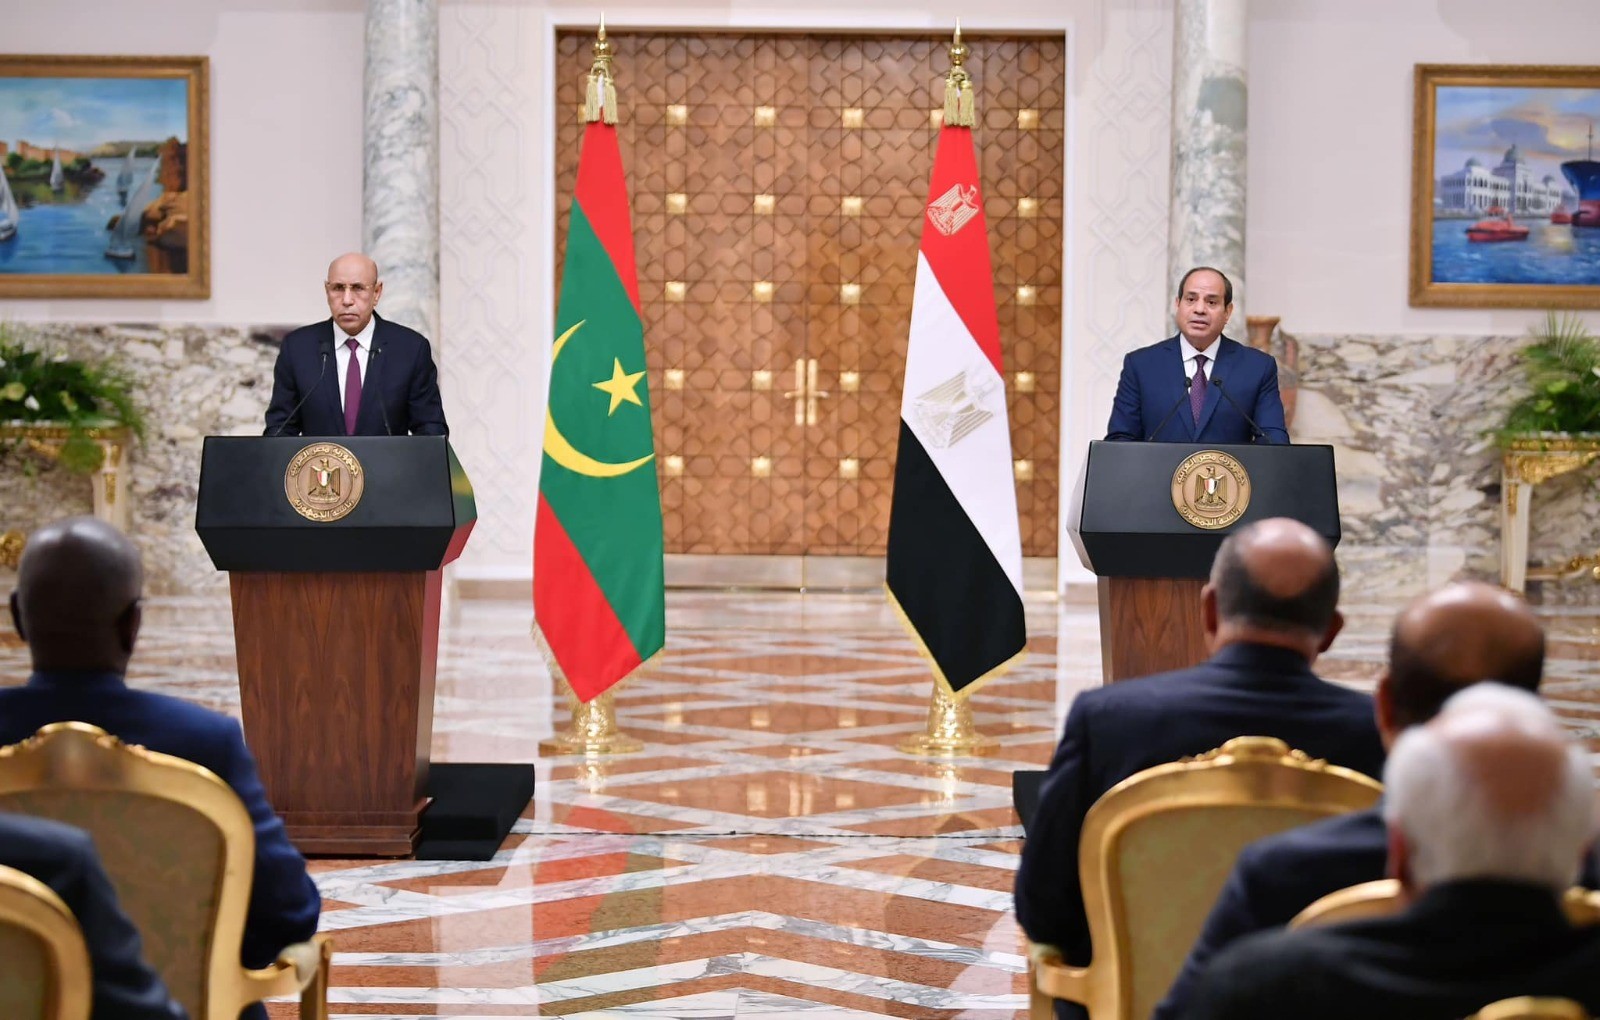 President of Mauritania with his Egyptian counterpart